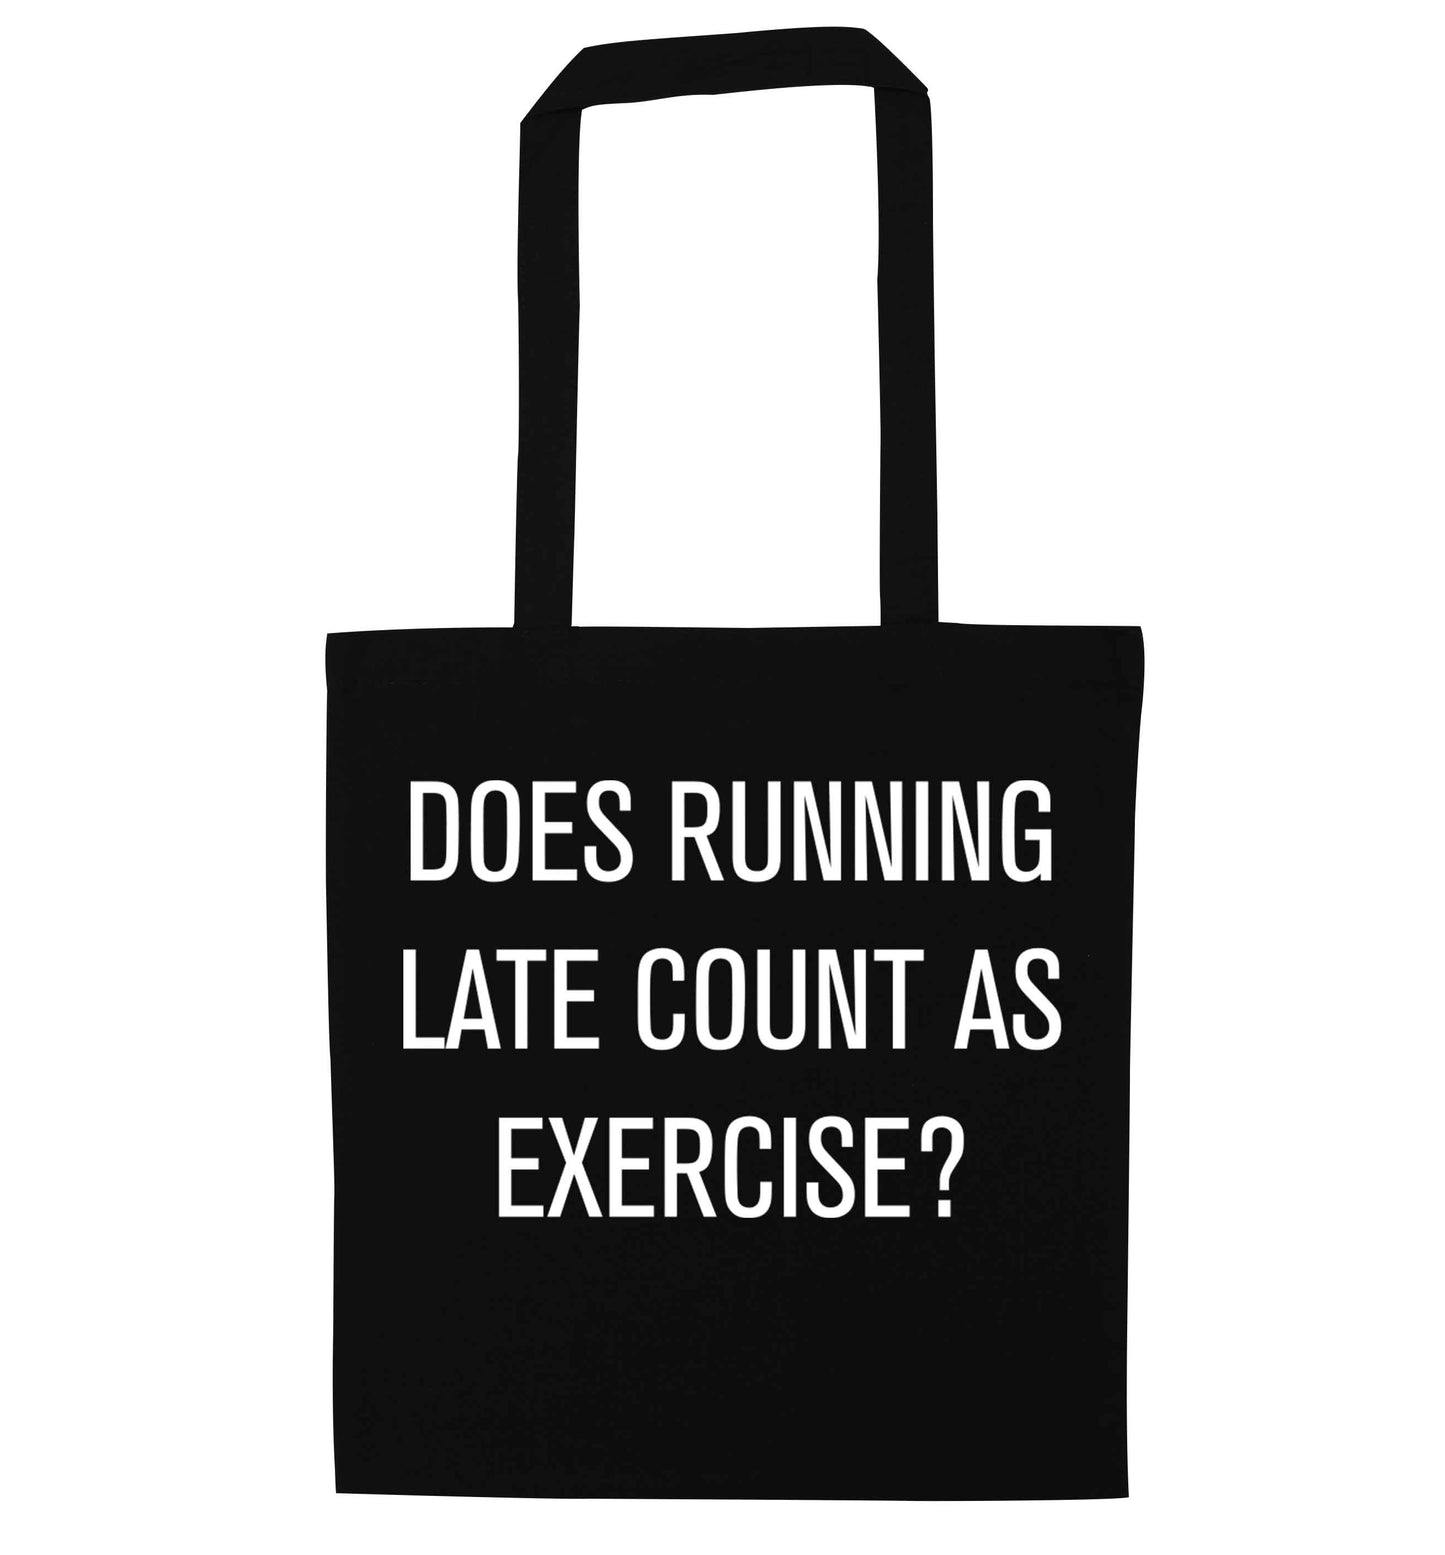 Does running late count as exercise? black tote bag